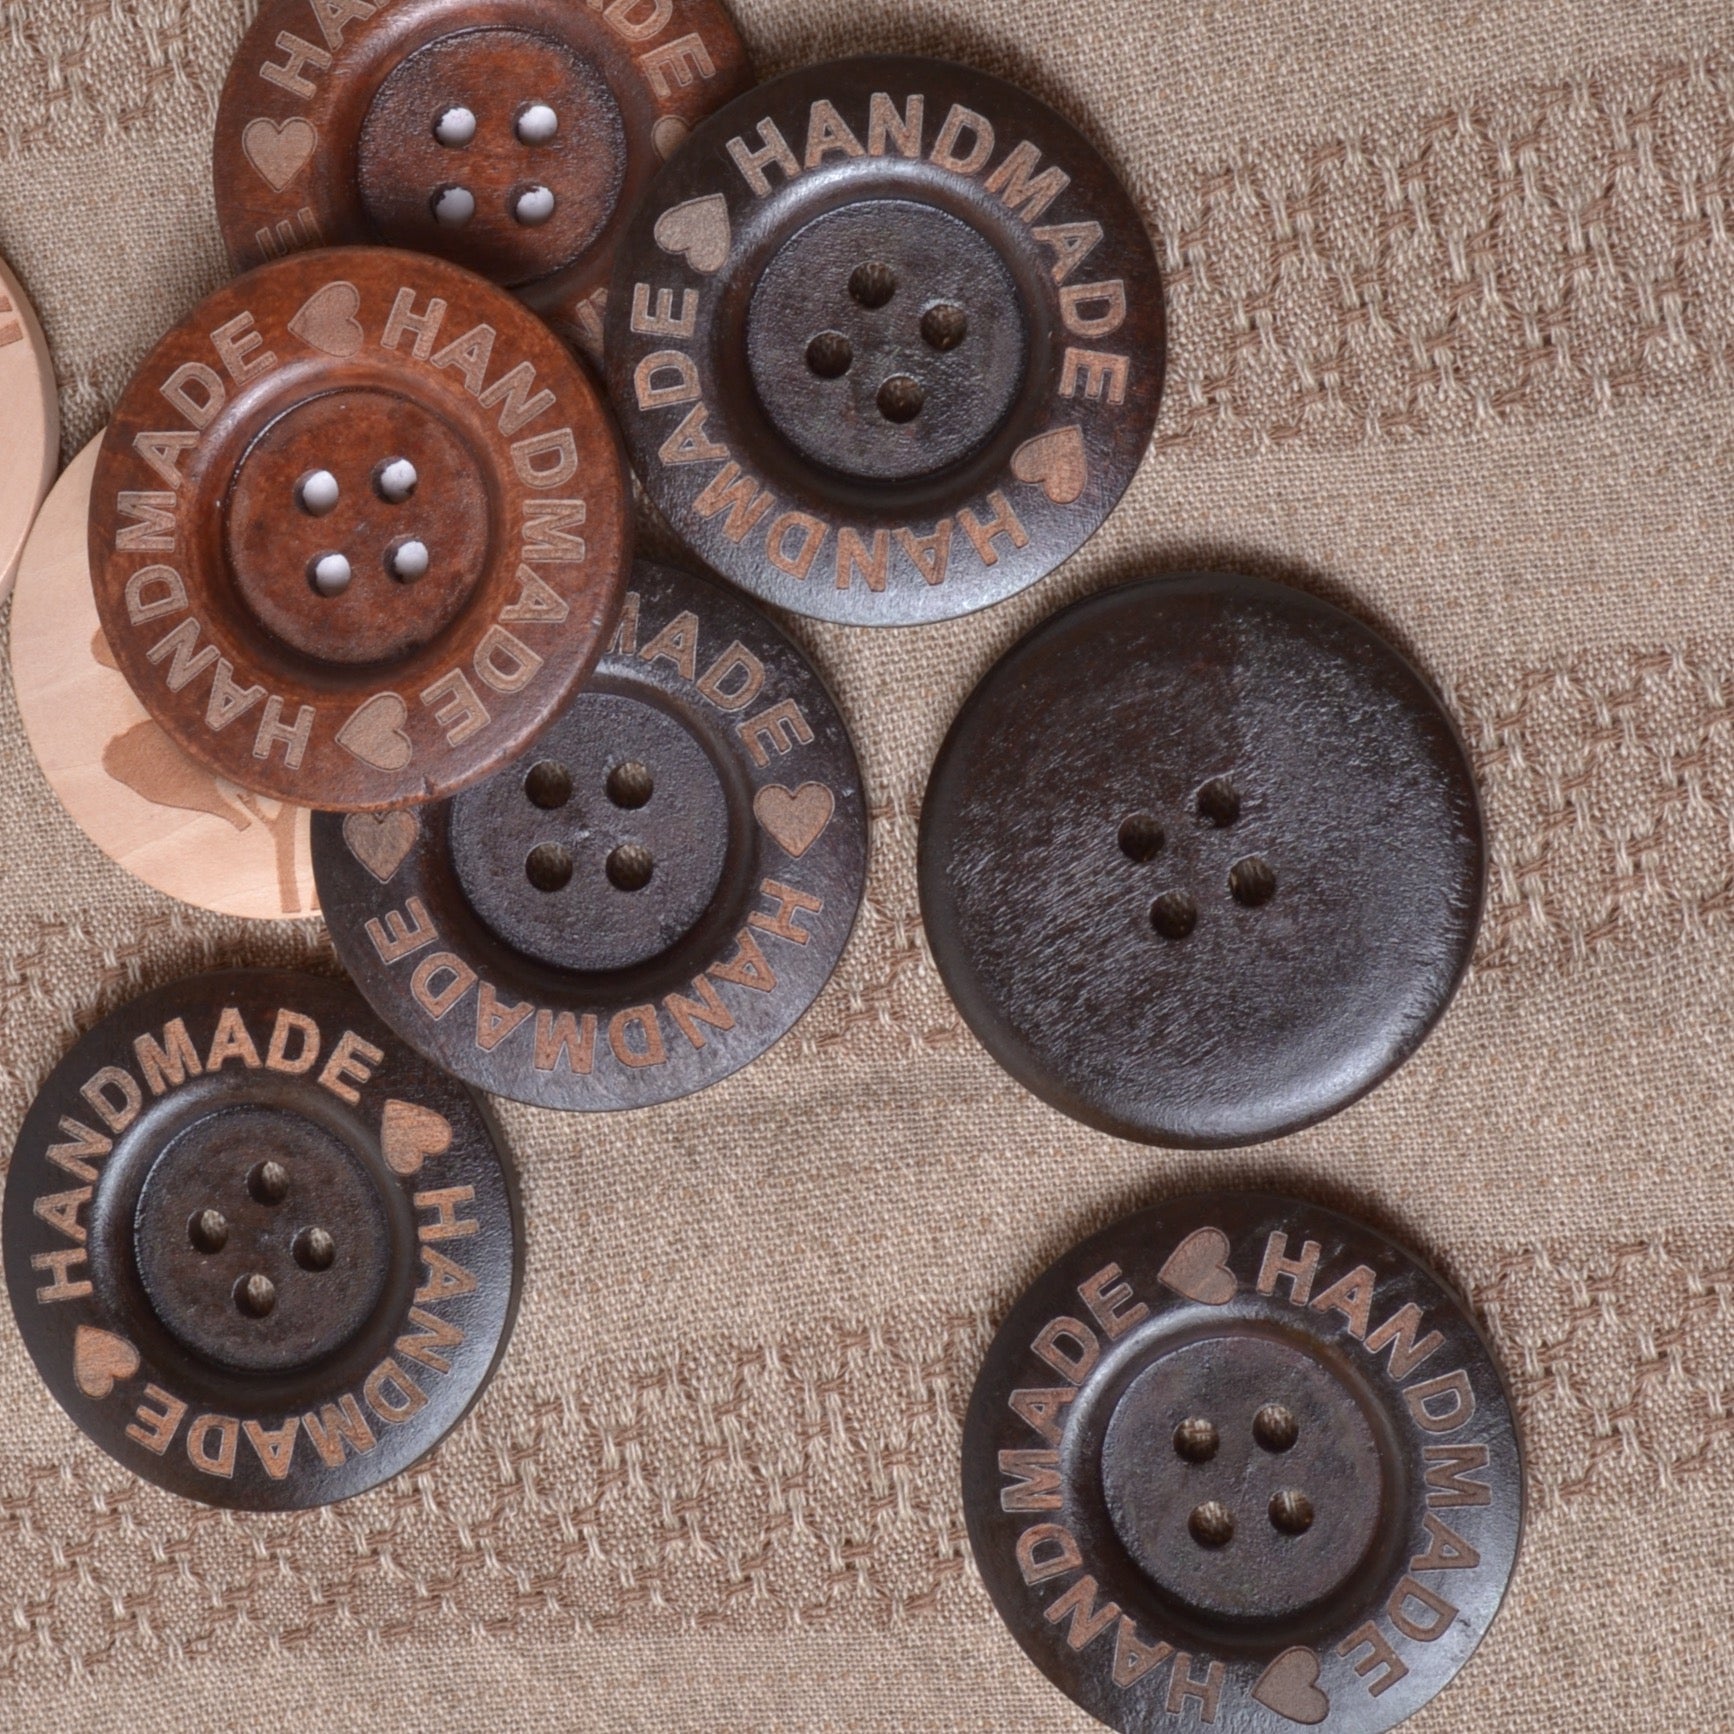 Decorative Wooden Buttons HANDMADE - A Threaded Needle